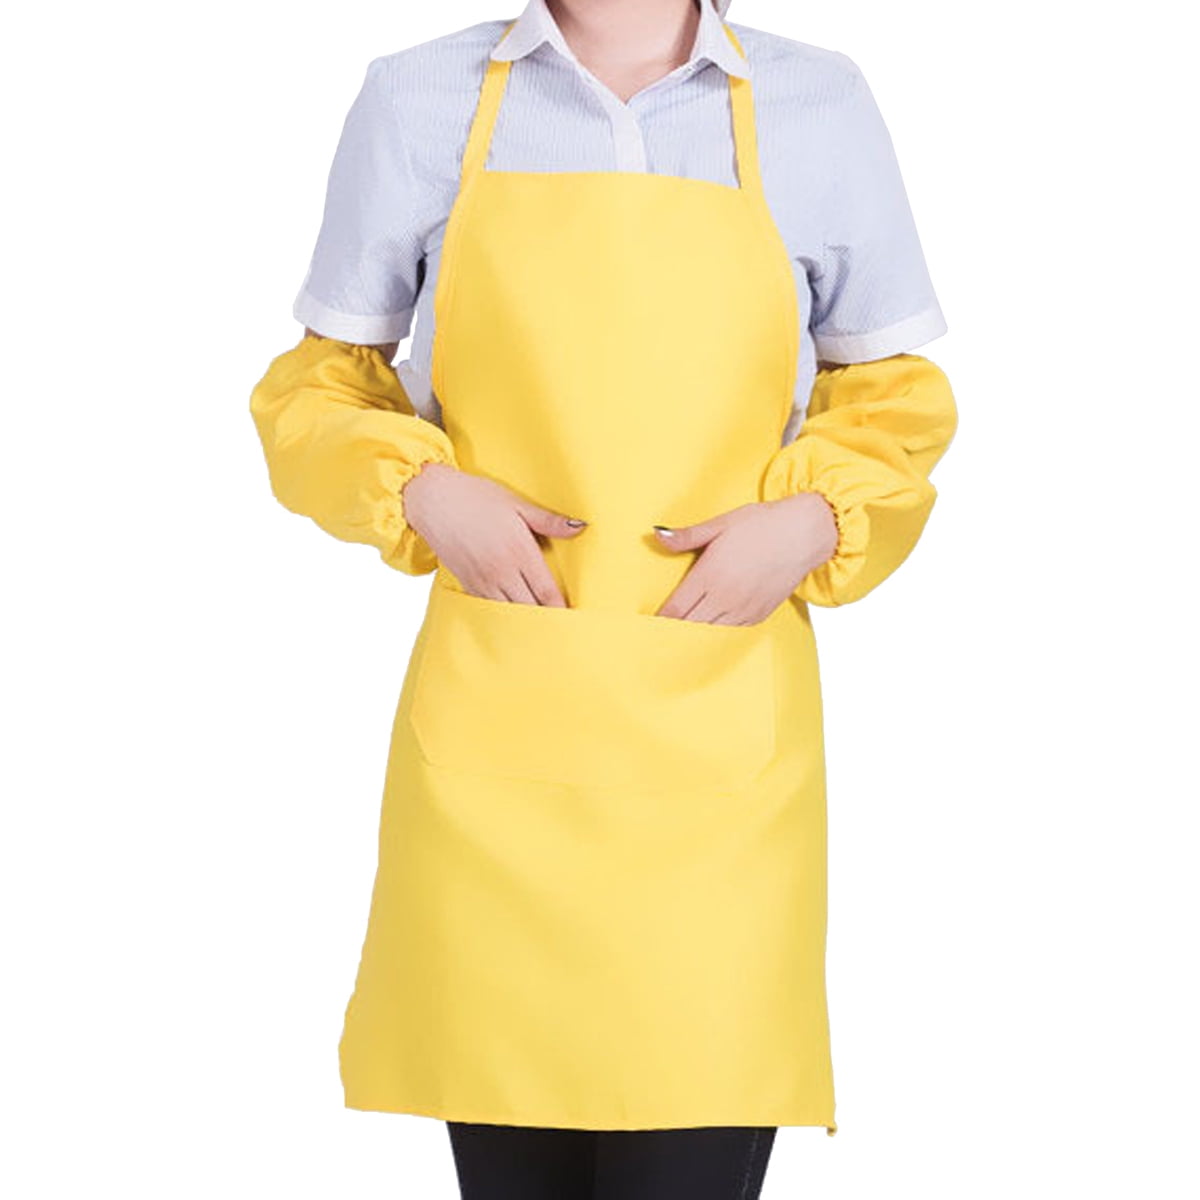 DESIGN & Plain Unisex Cooking Catering Work Apron Tabard with Twin Double Pocket 